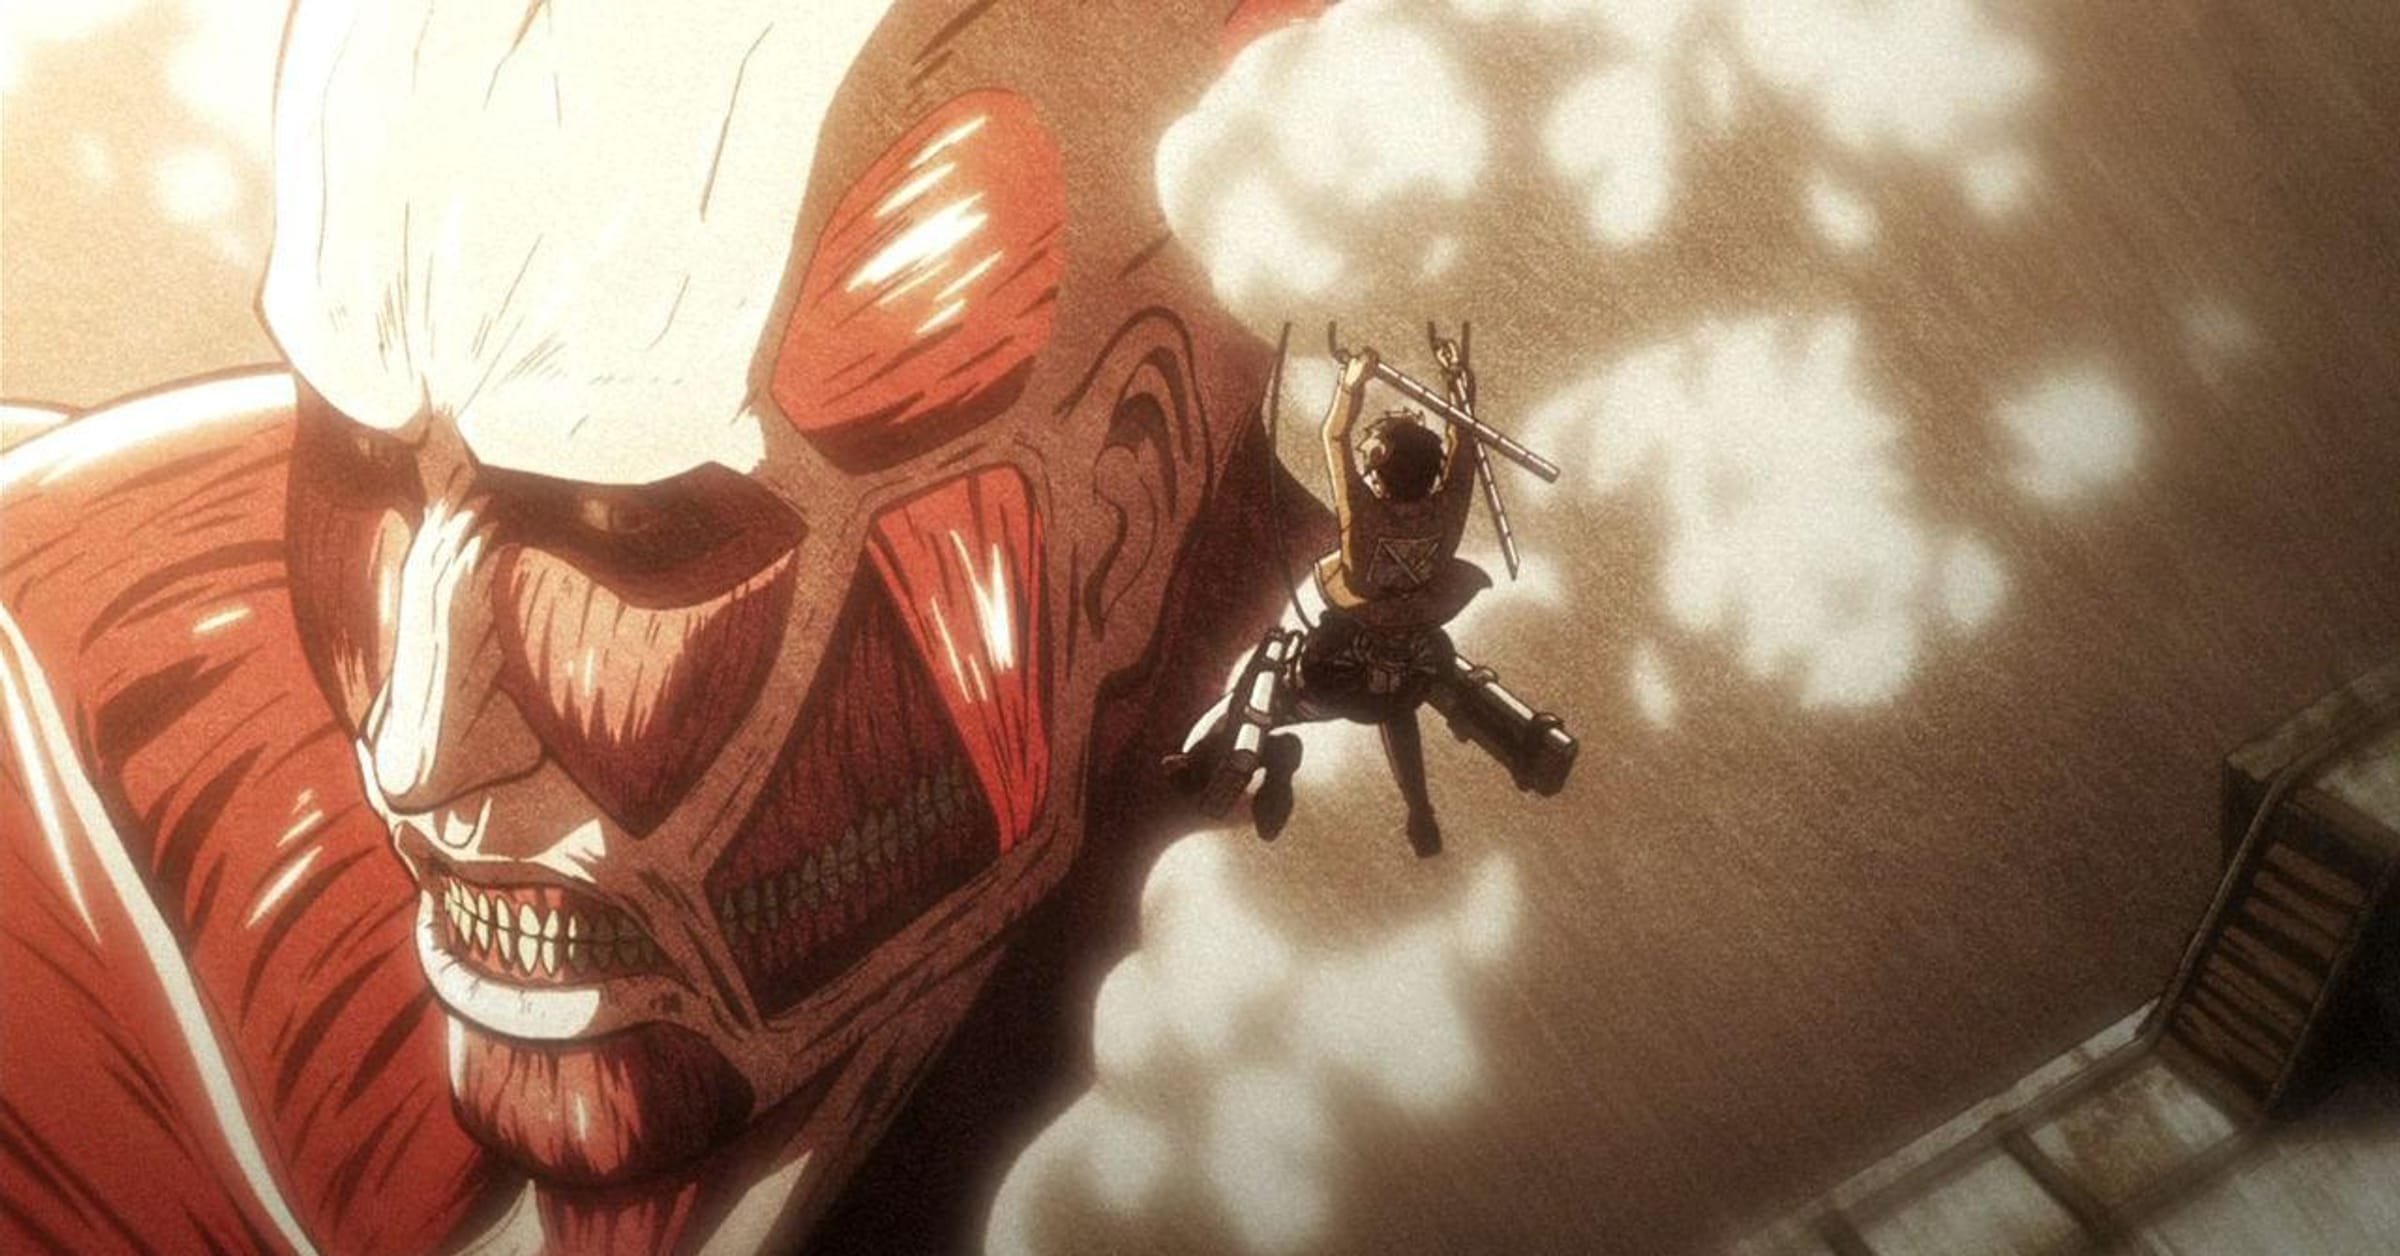 5 Anime Series Like Attack on Titan to Watch While You Wait for